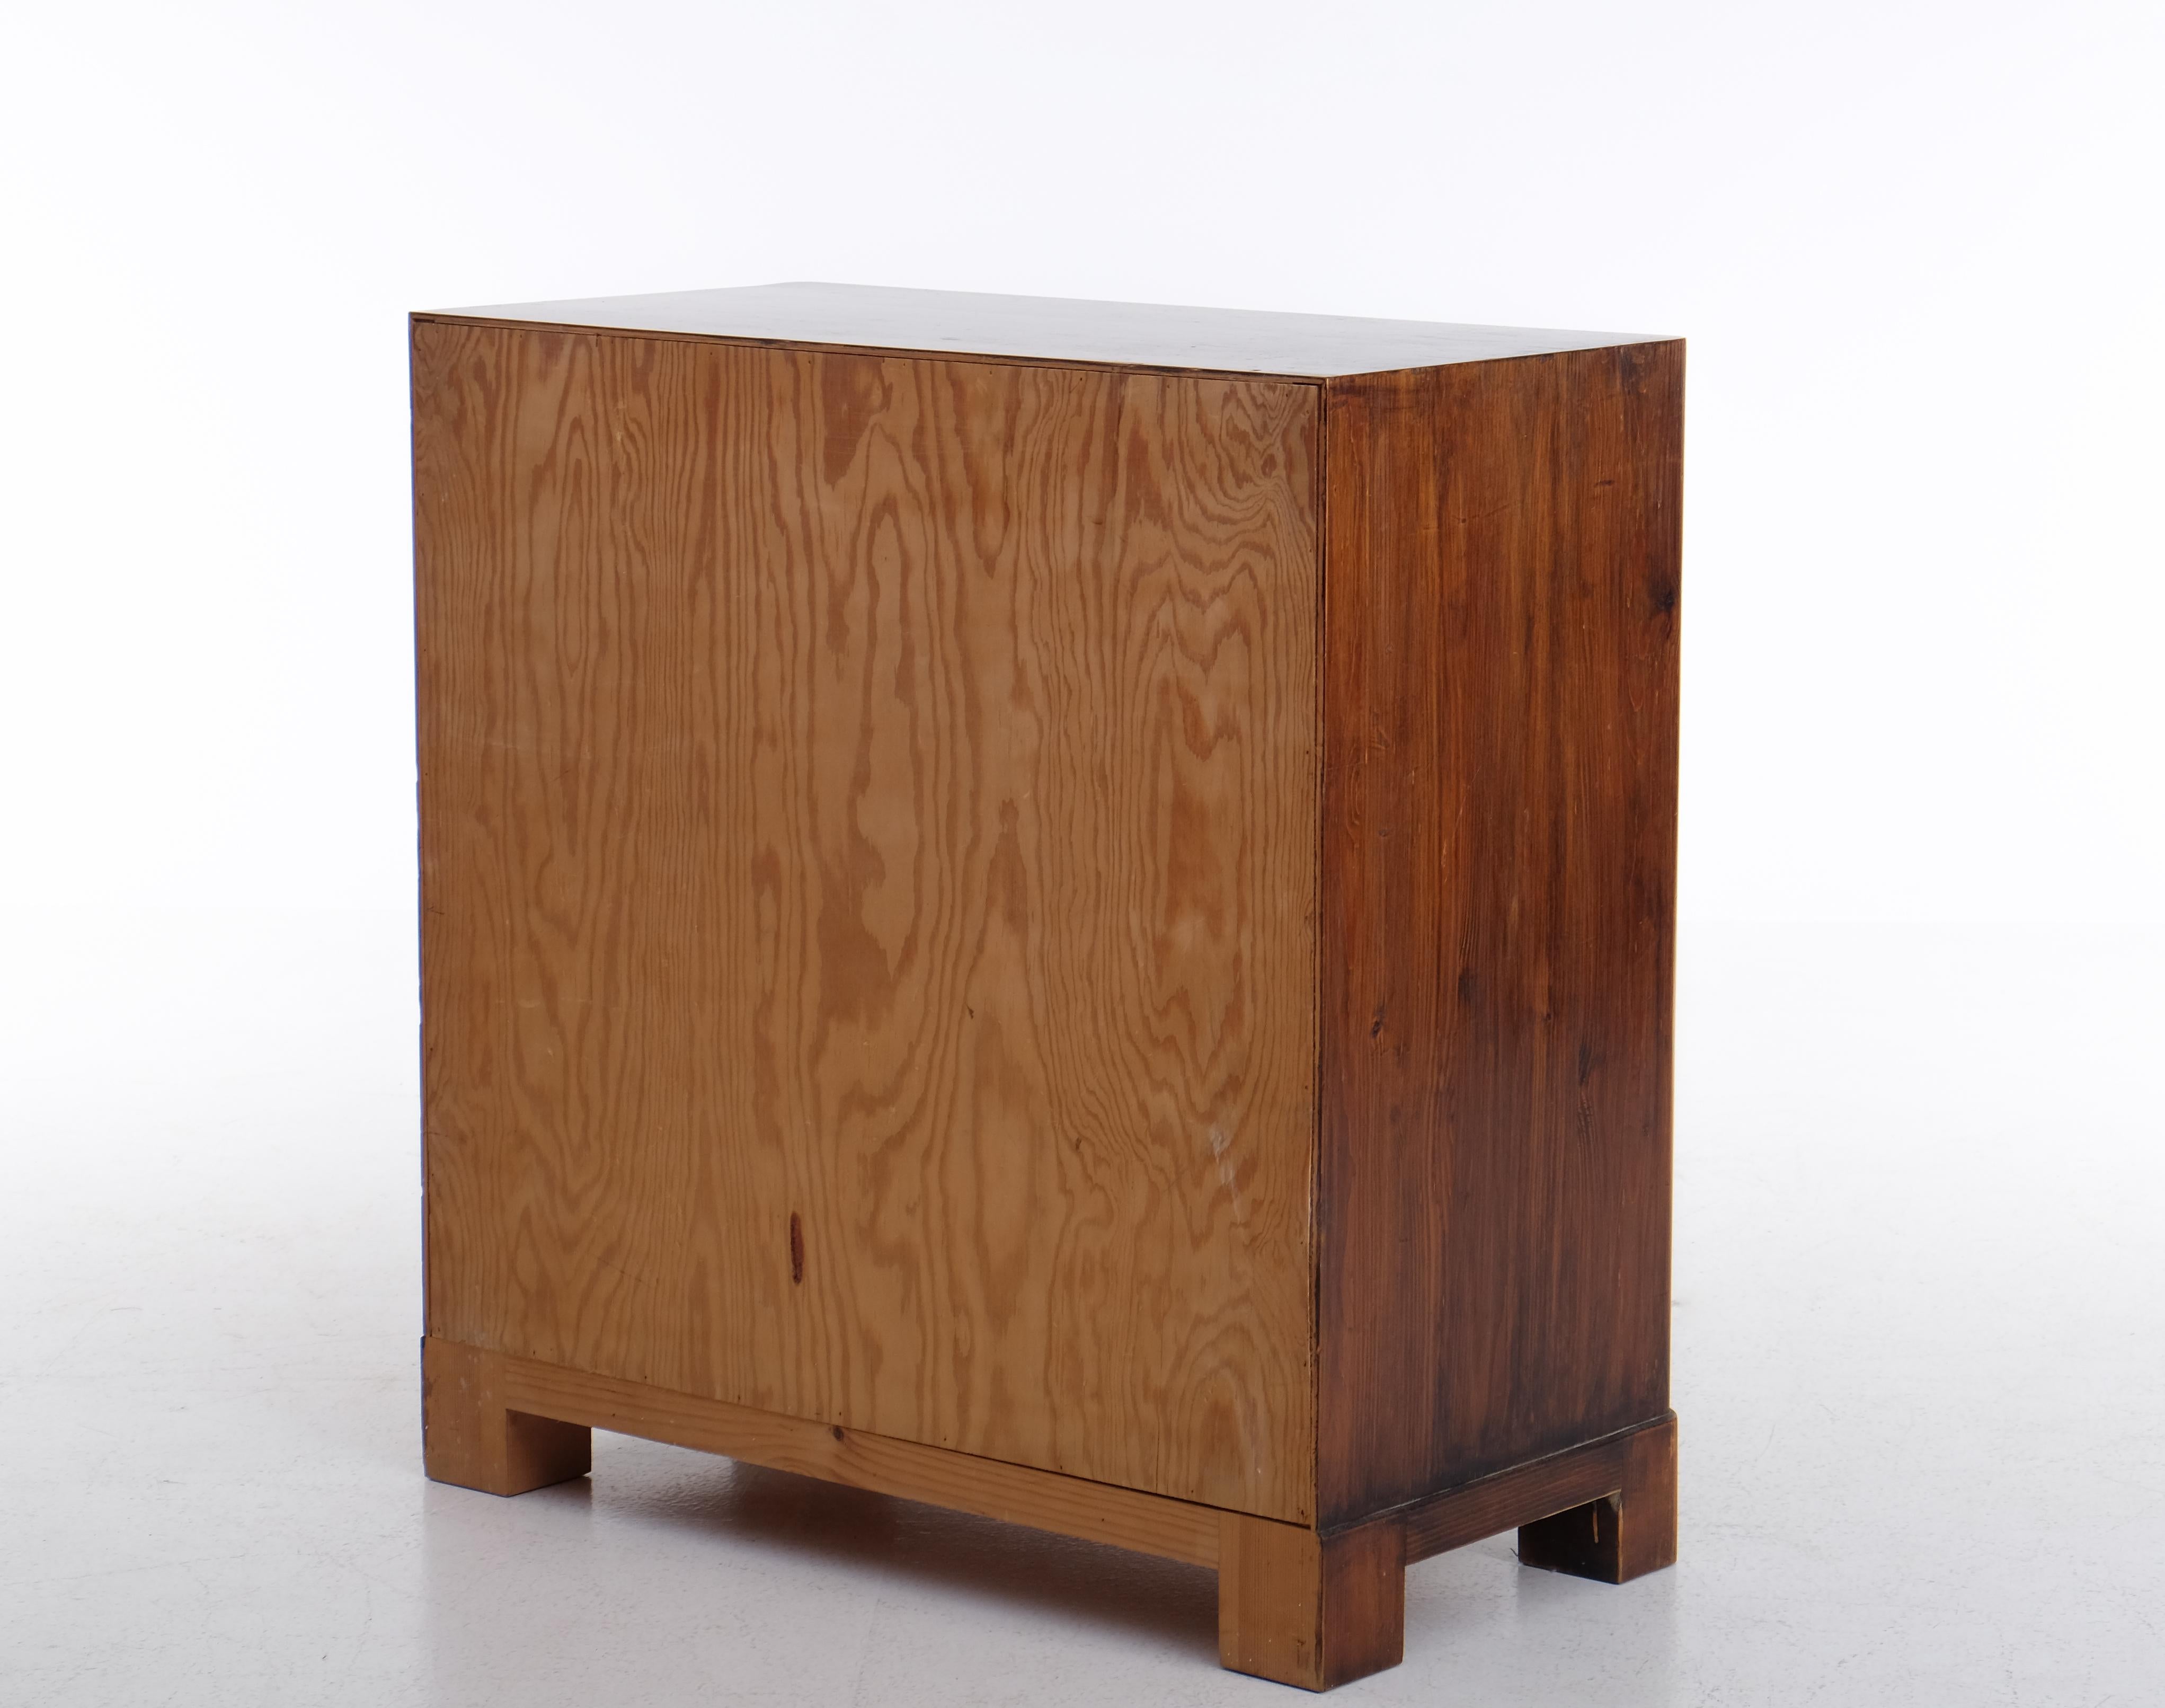 Rare Bureau / Chest of Drawers in pine, Sweden, 1930s For Sale 2